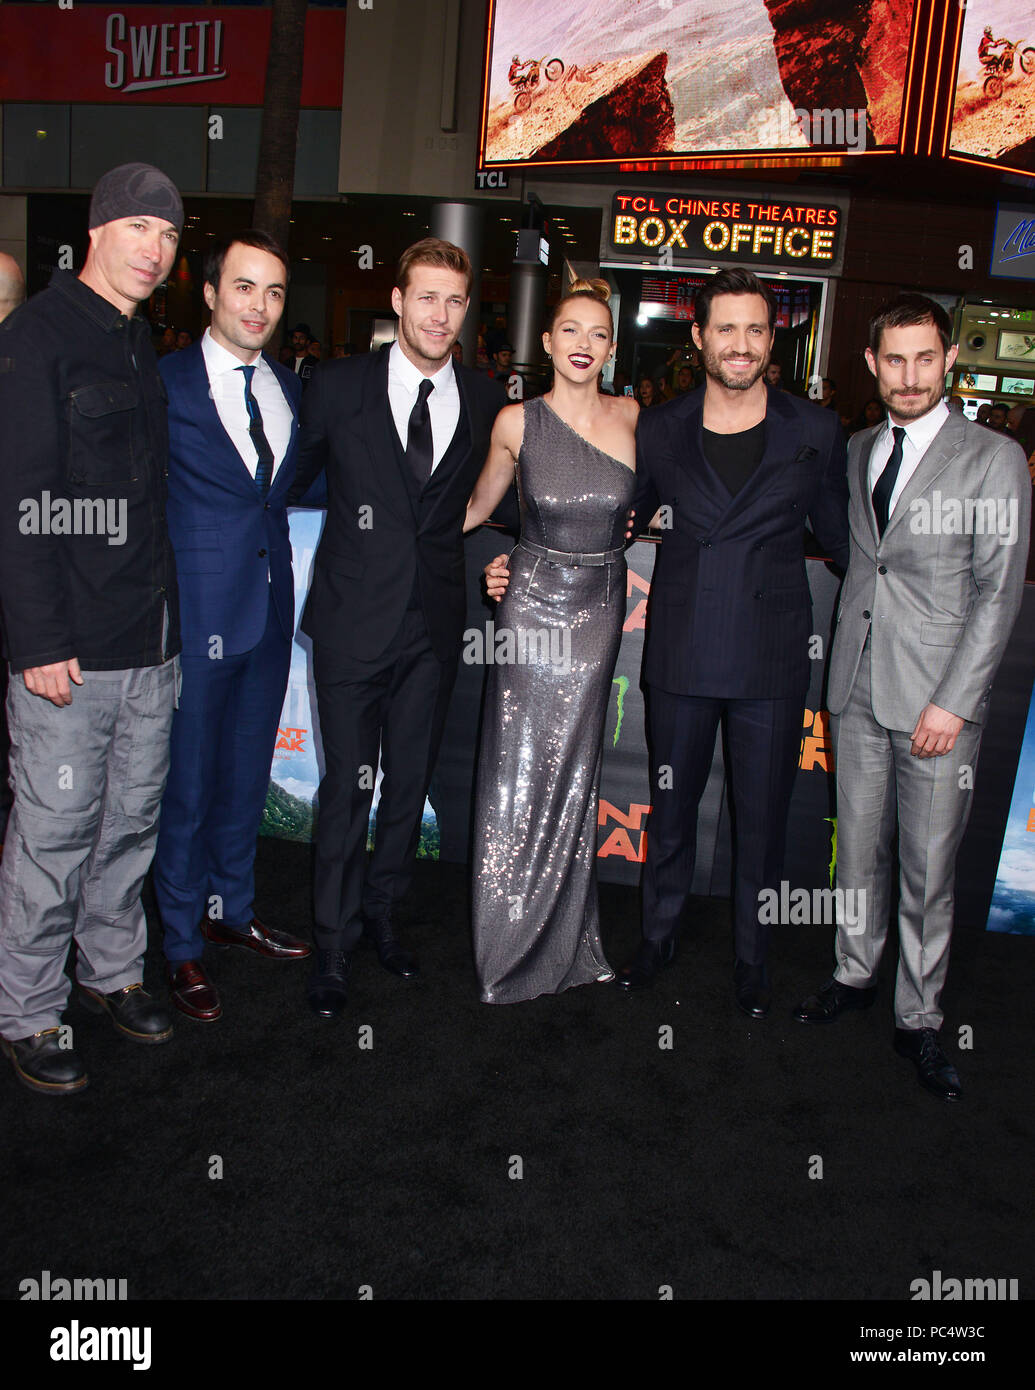 Ericson Core, Nikolai Kinski, Luke Bracey, Teresa Palmer, Edgar Ramirez and Clemens Schick  at the Point Break Premiere at the TCL Chinese Theatre in Los Angeles. December 15, 2015.Ericson Core, Nikolai Kinski, Luke Bracey, Teresa Palmer, Edgar Ramirez and Clemens Schick   Event in Hollywood Life - California, Red Carpet Event, USA, Film Industry, Celebrities, Photography, Bestof, Arts Culture and Entertainment, Topix Celebrities fashion, Best of, Hollywood Life, Event in Hollywood Life - California, Red Carpet and backstage, movie celebrities, TV celebrities, Music celebrities, Arts Culture a Stock Photo